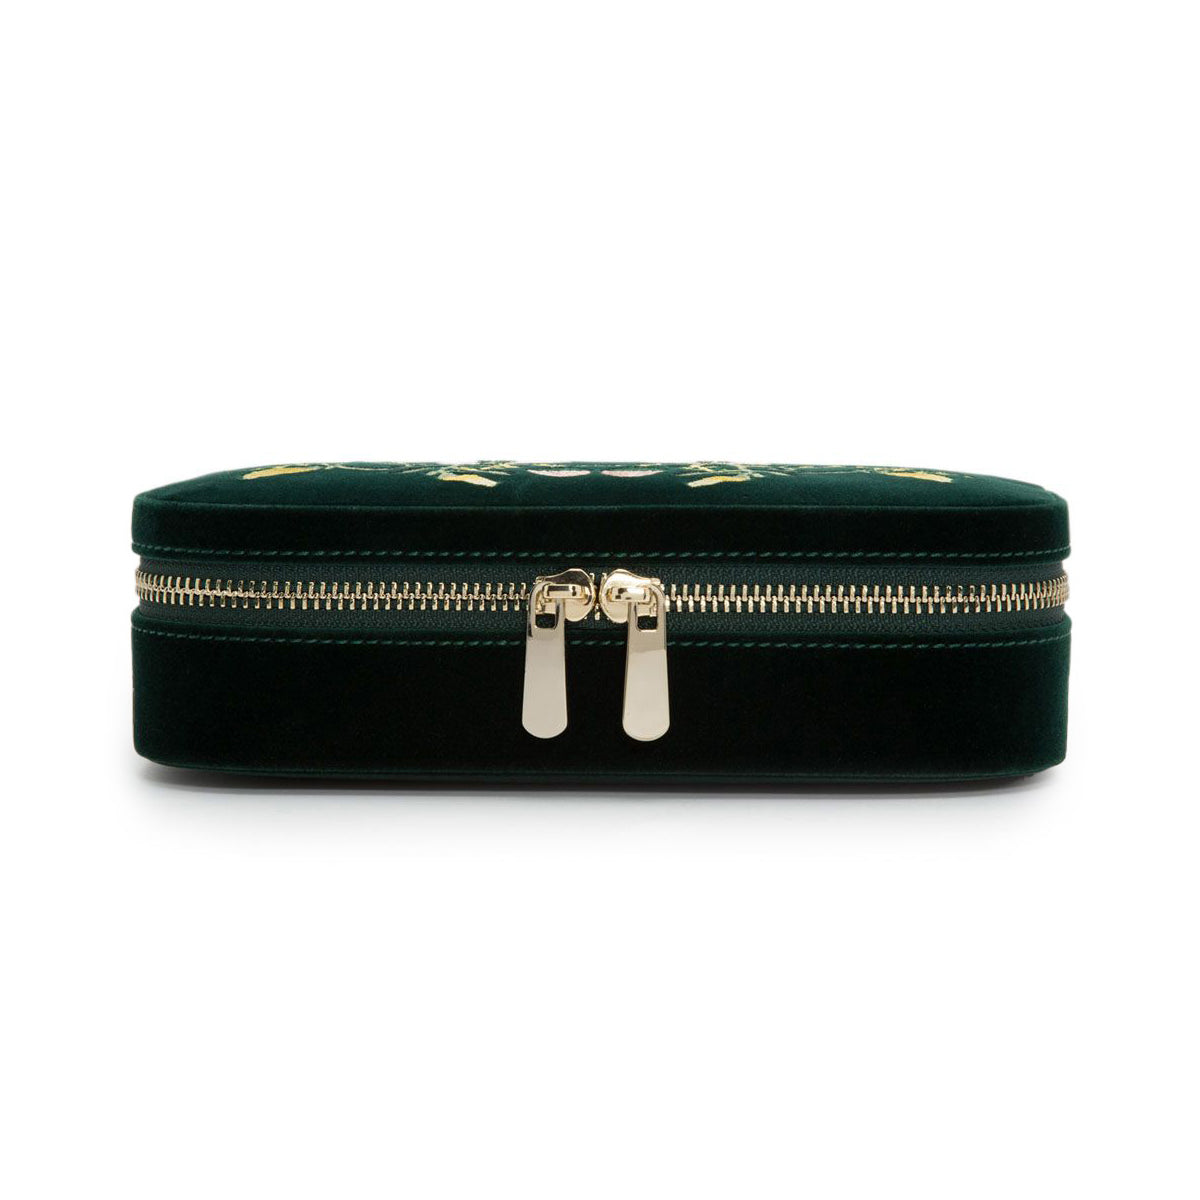 Zoe Travel Case in Forest Green